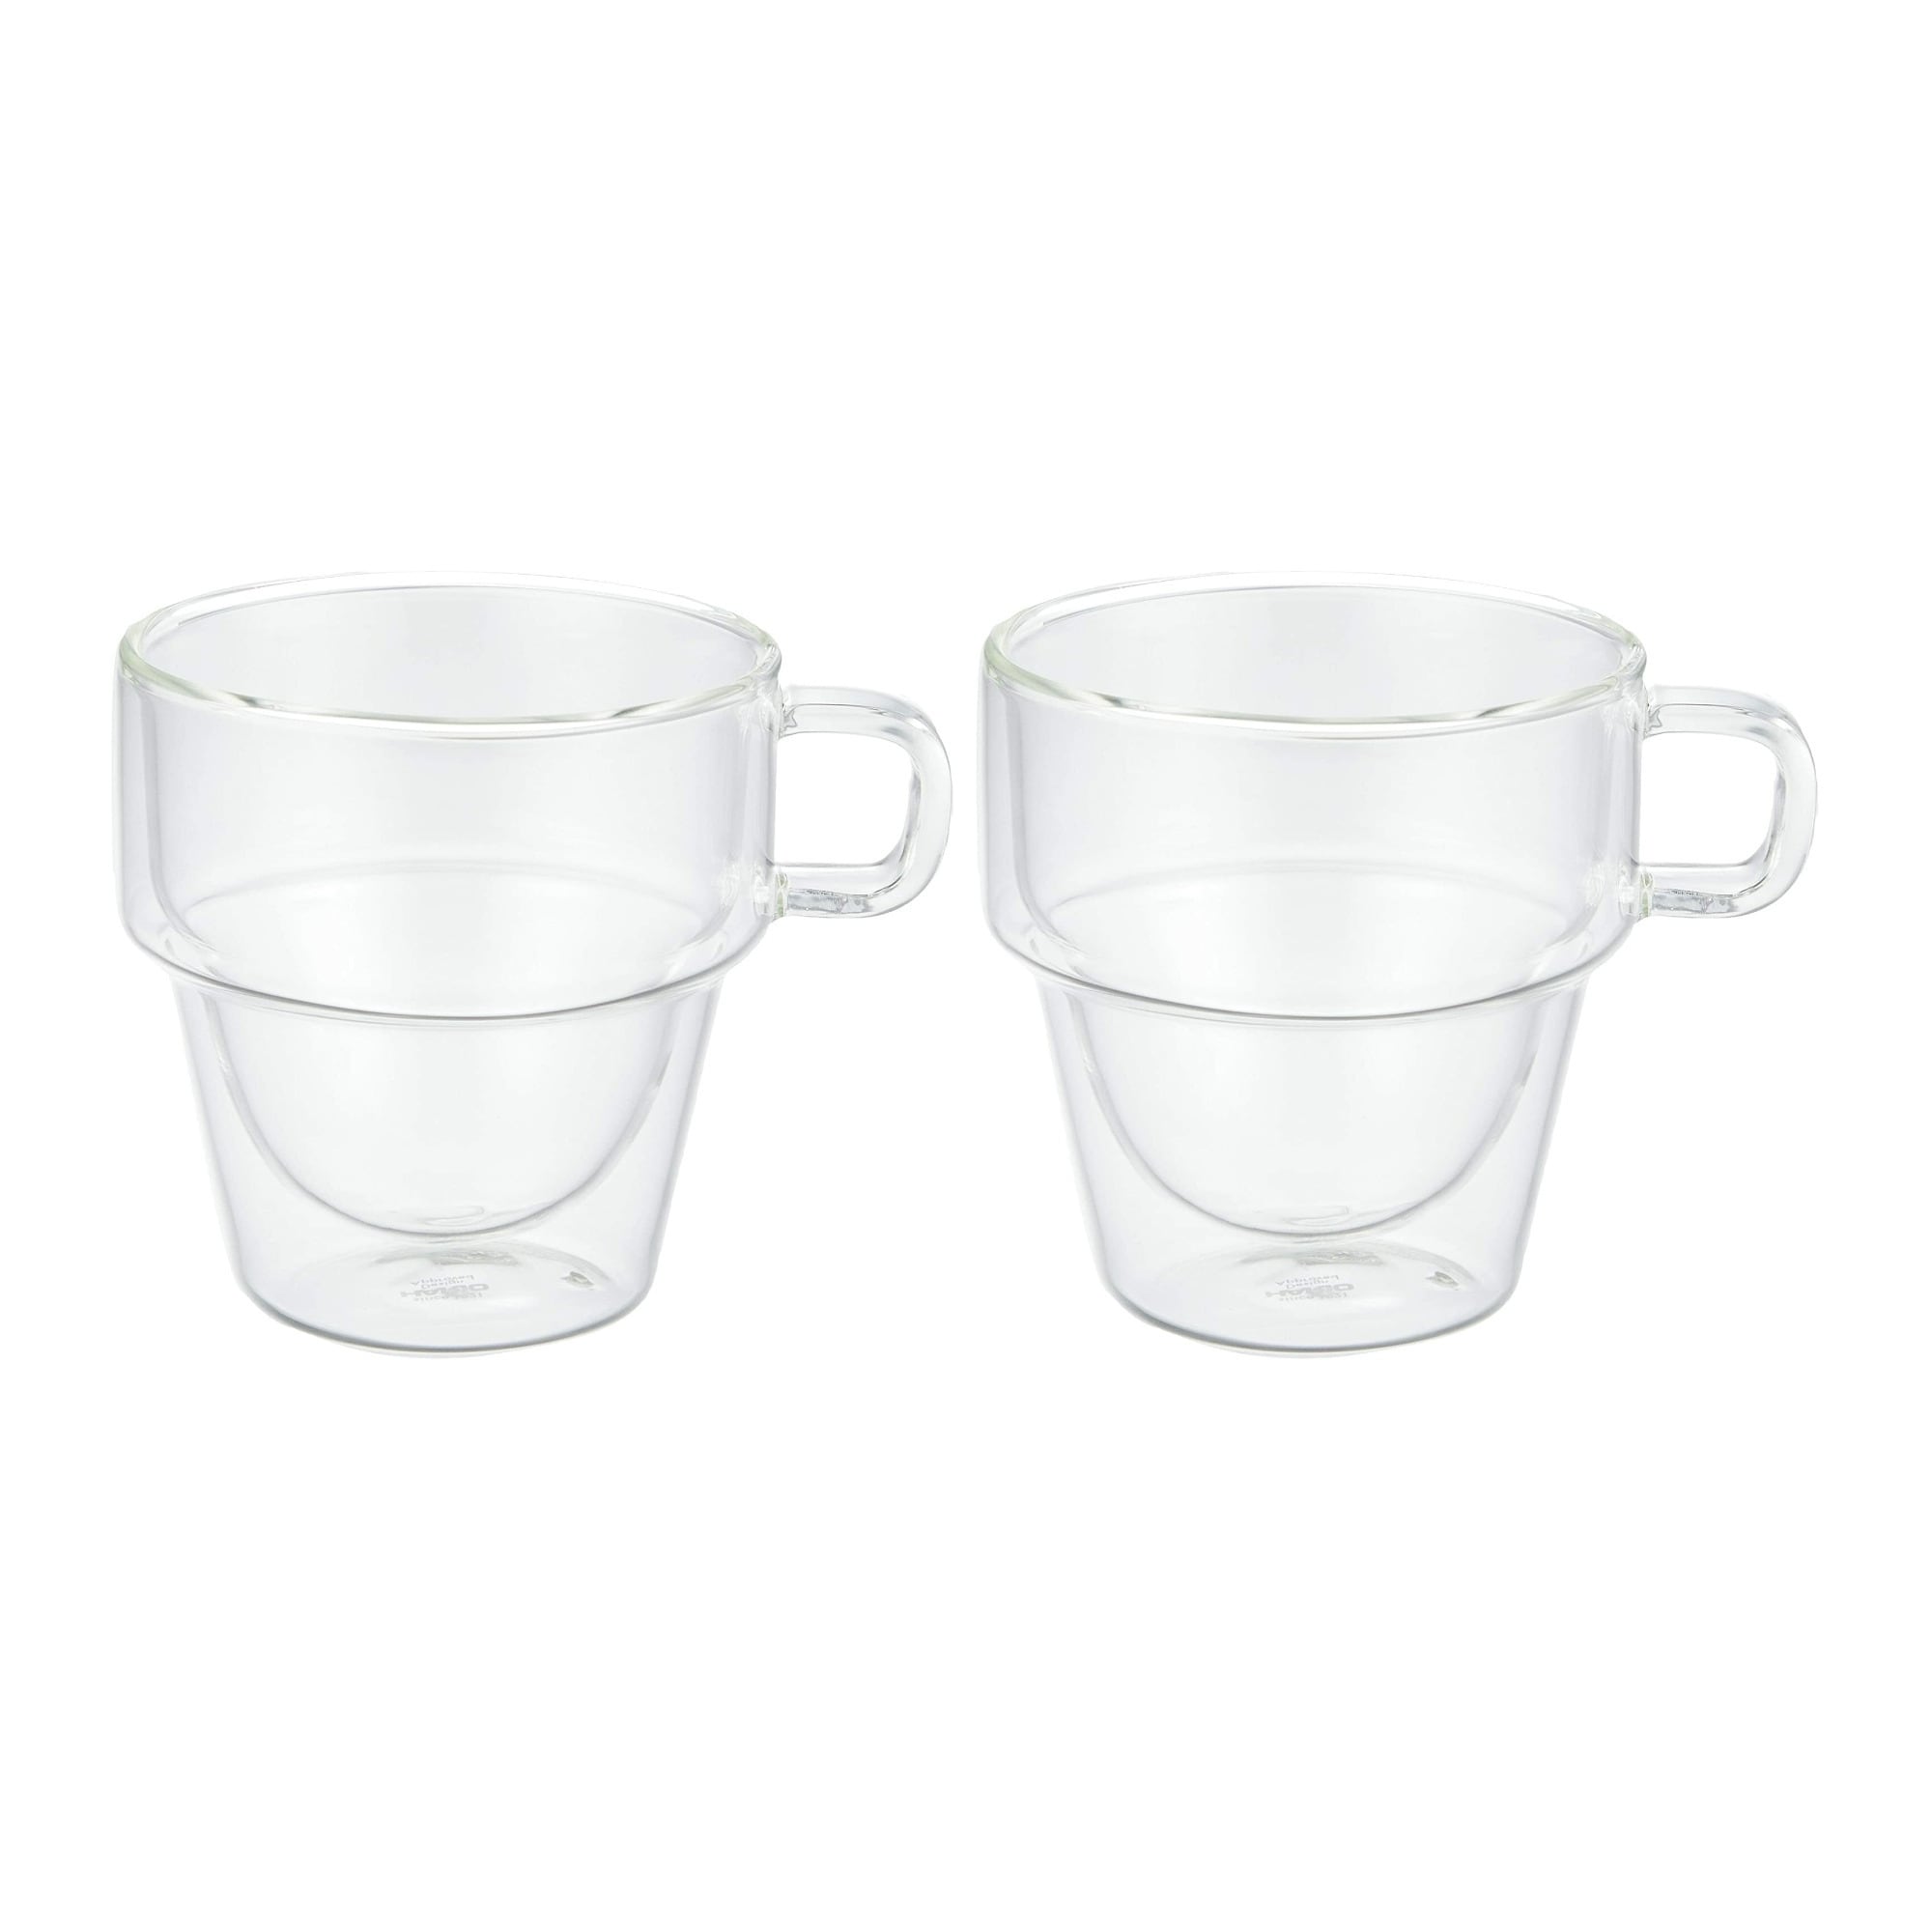 https://ak1.ostkcdn.com/images/products/is/images/direct/4c8f8a7216c27603b8c0faf455f19c2908559972/Hario-Double-Wall-Stack-Cups-%28280ml%2C-2-Piece-Set%29.jpg